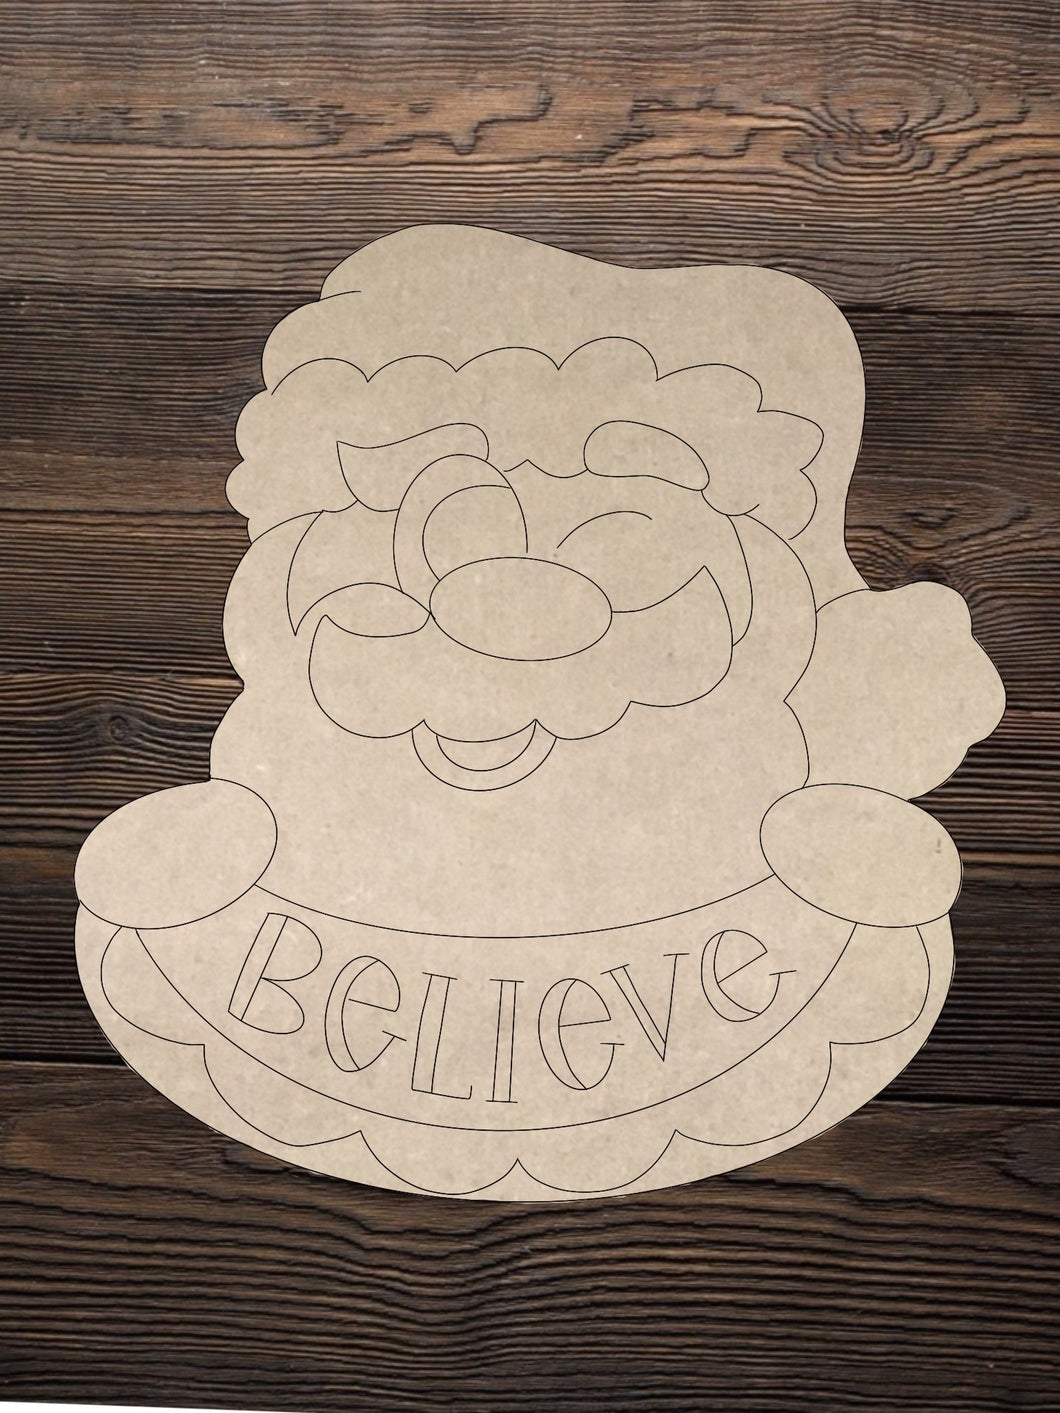 Cut and Traced Believe Santa